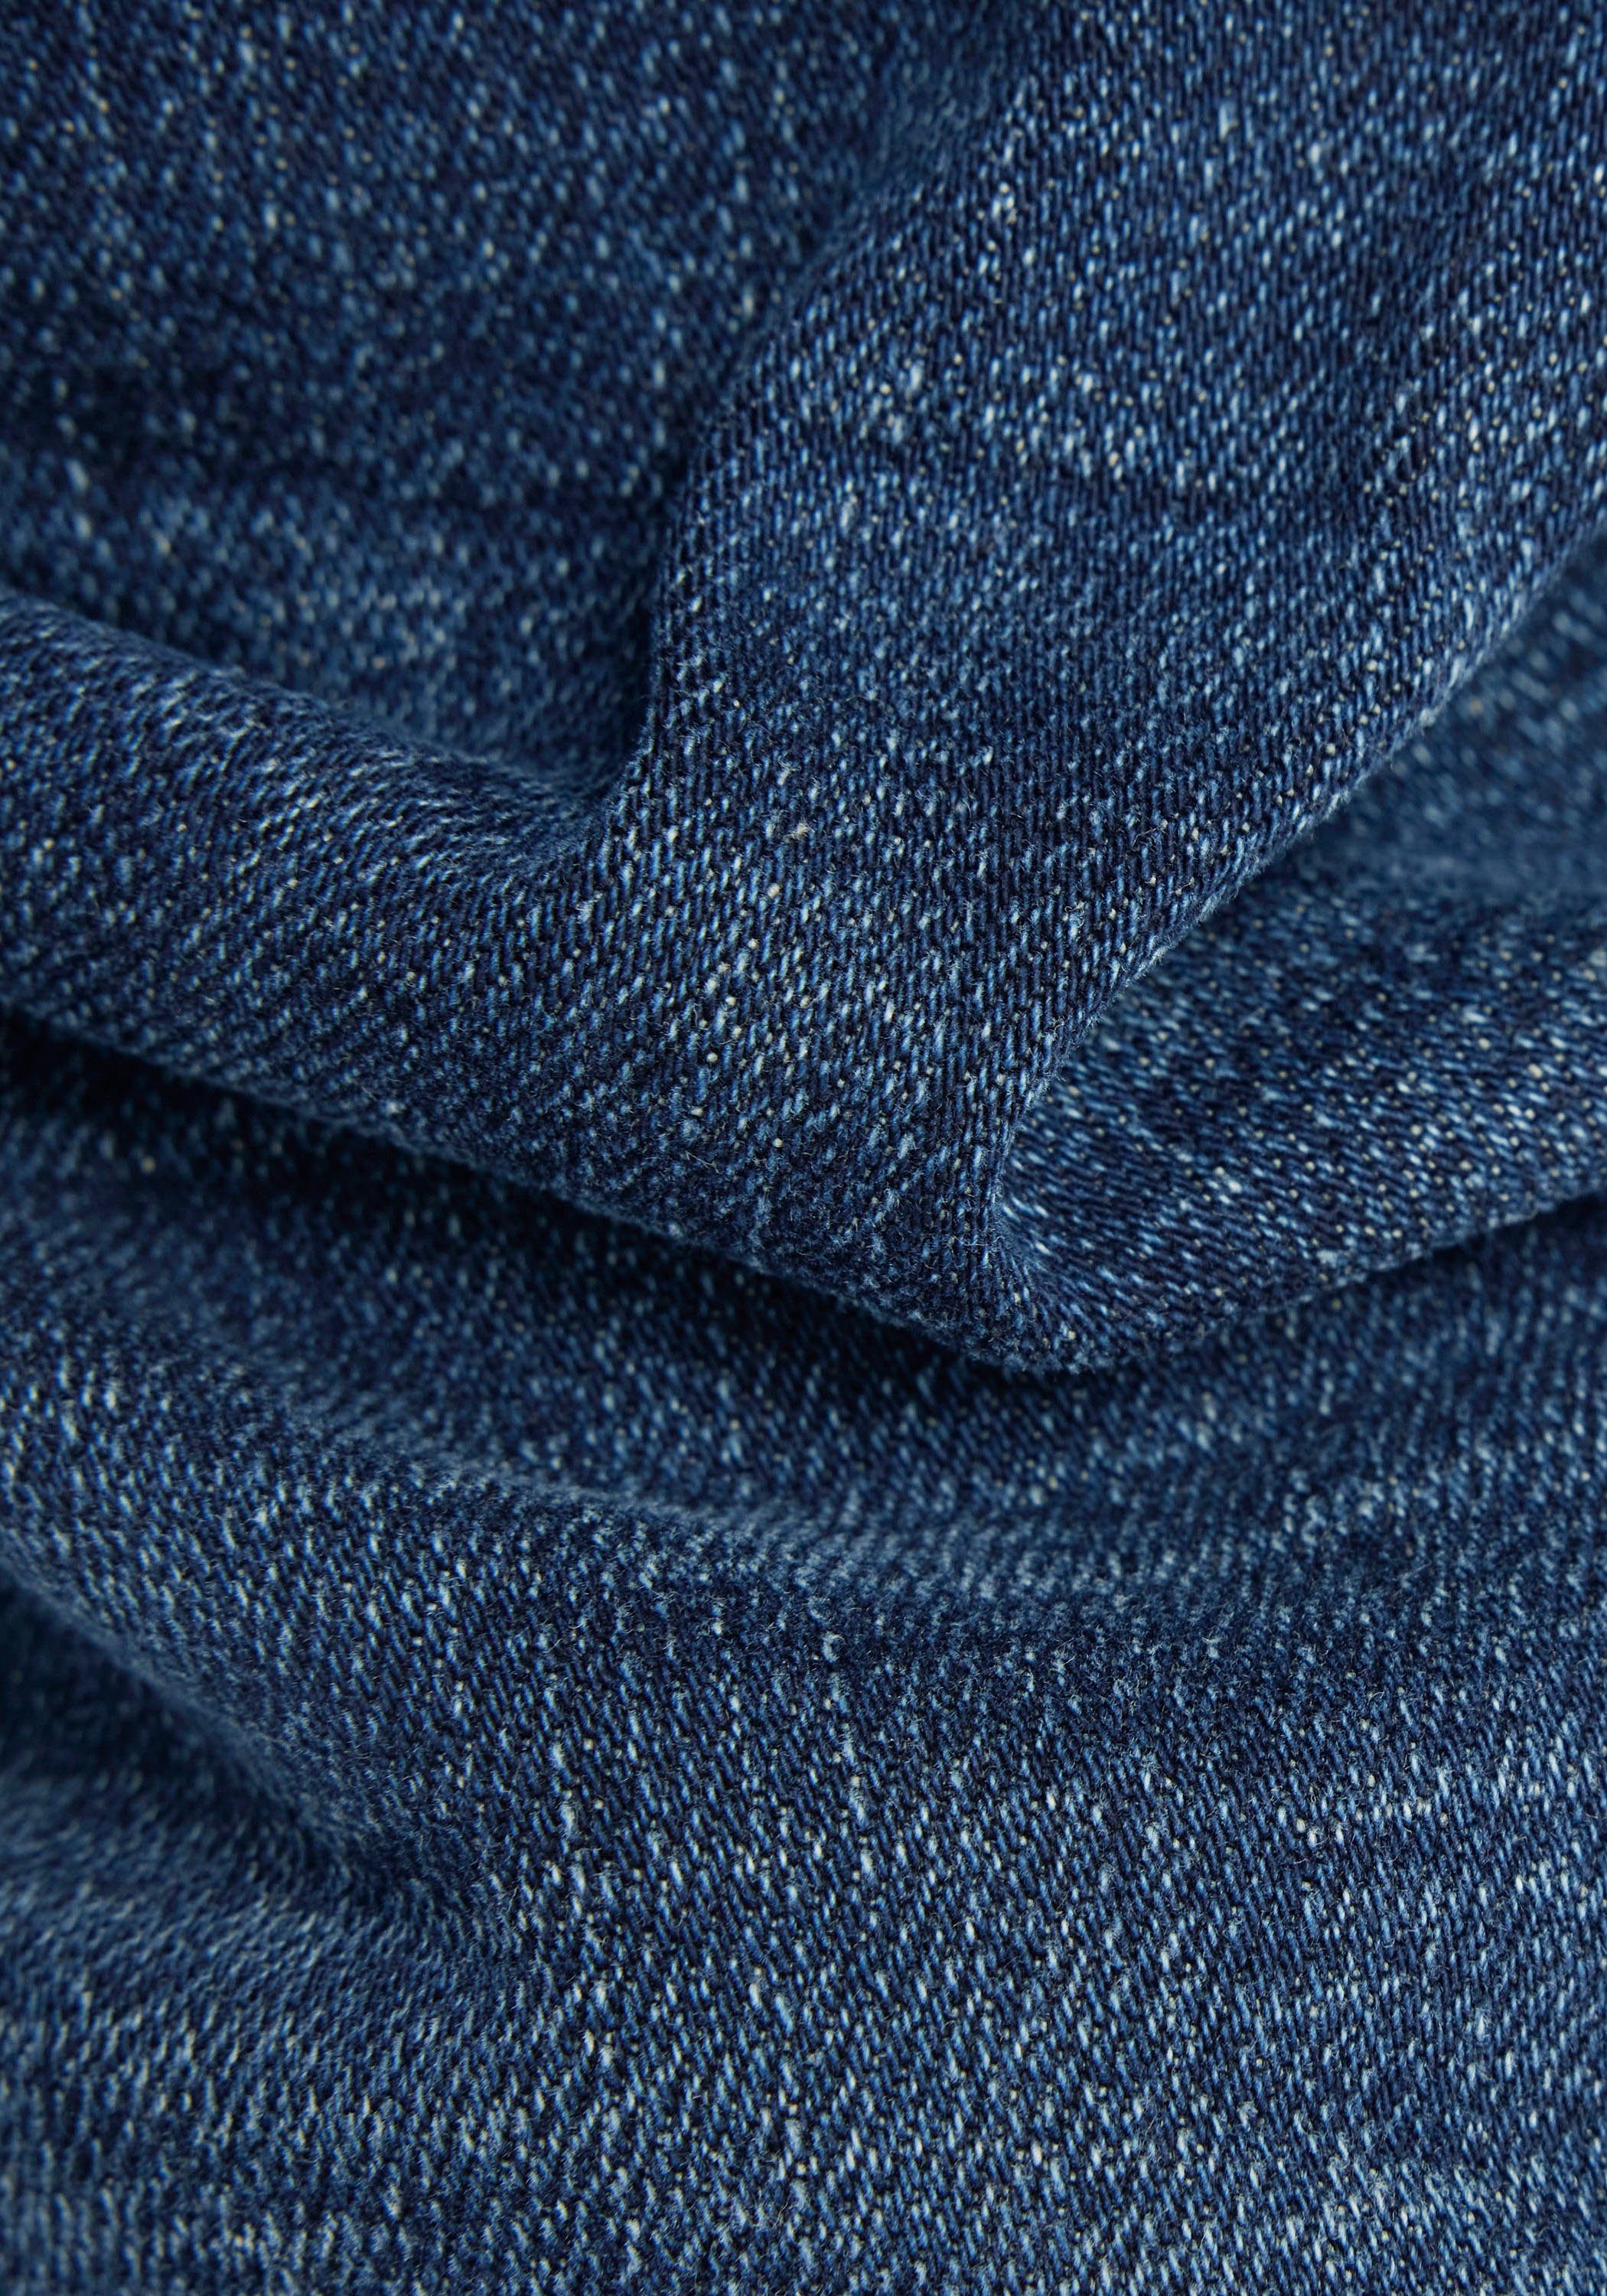 himalayan worn RAW in blue G-Star Skinny-fit-Jeans